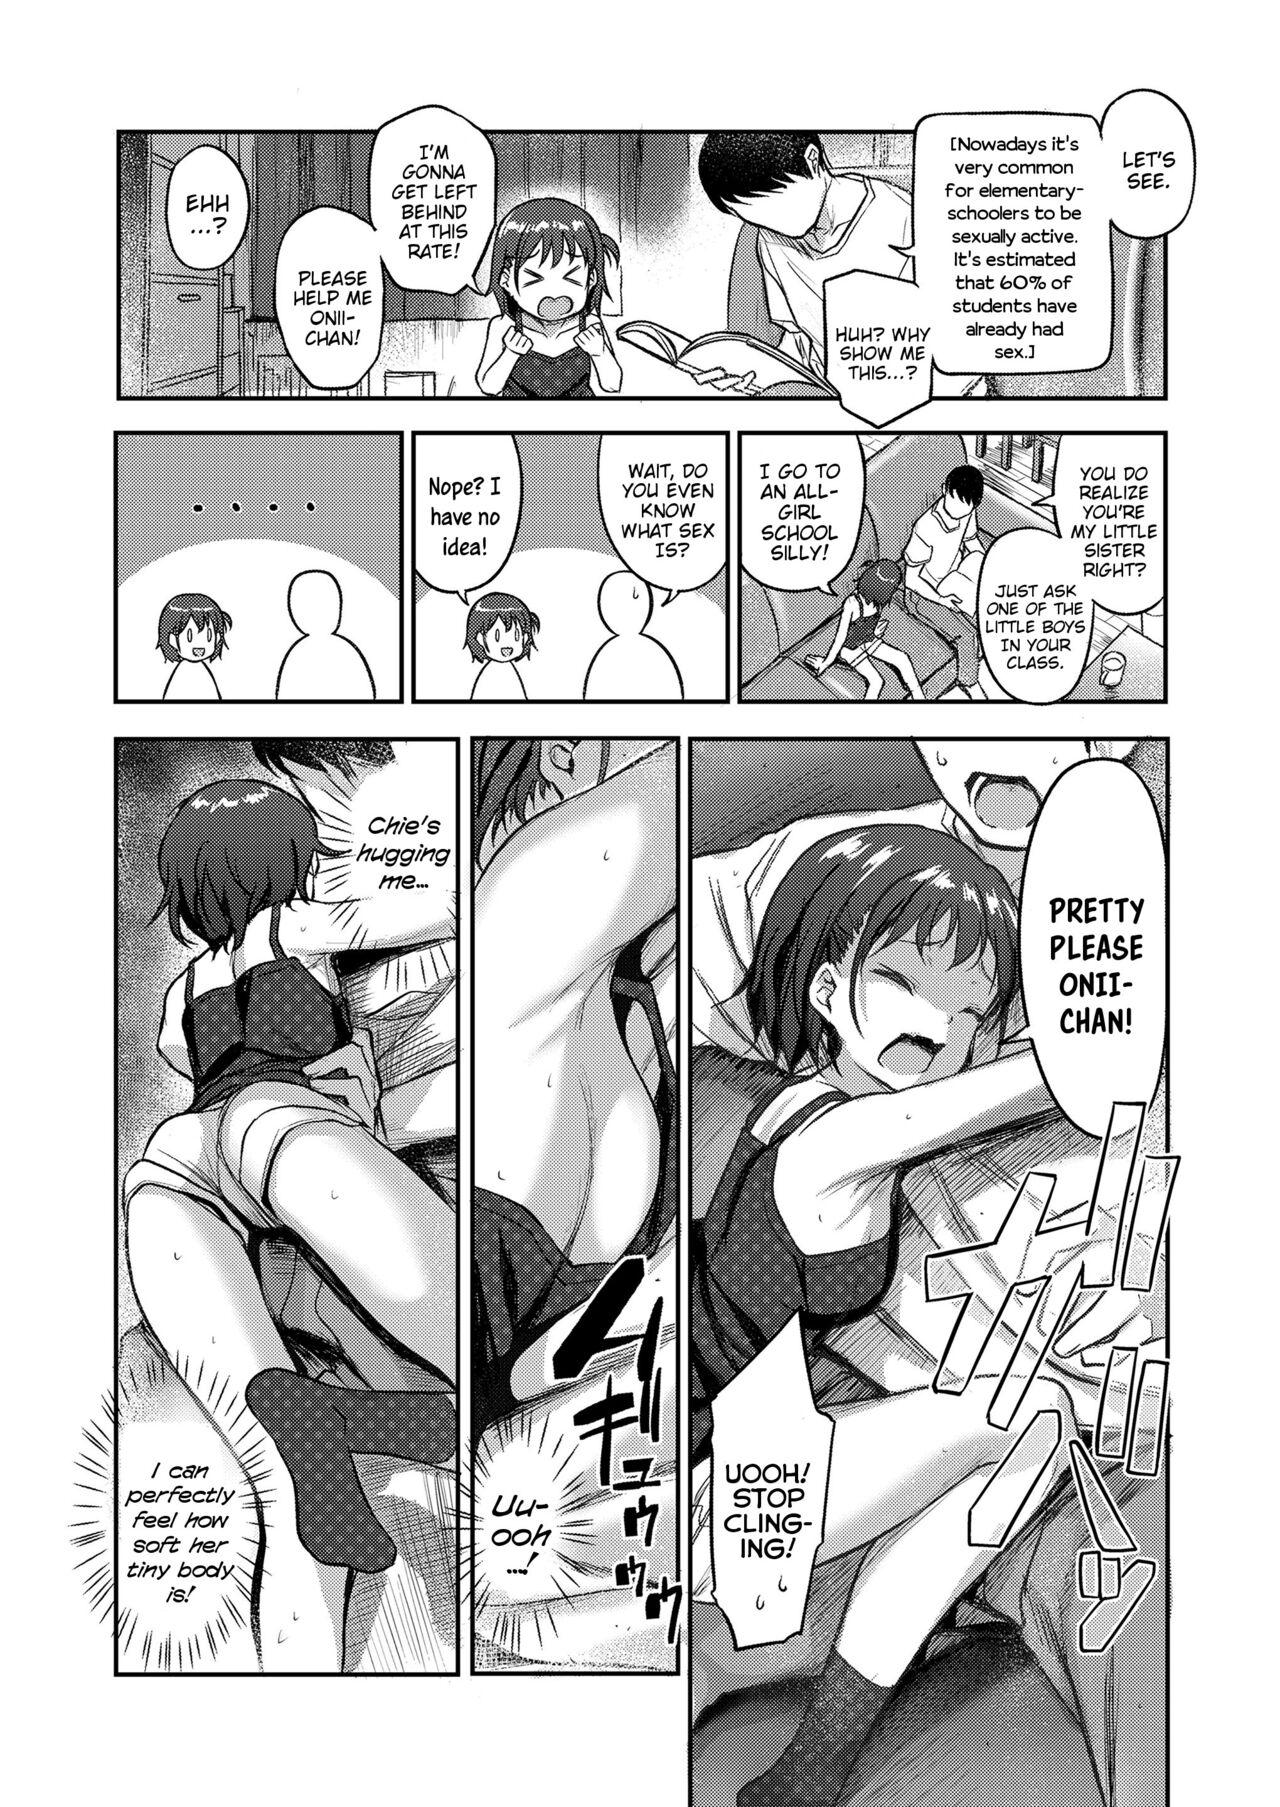 Threeway Koukishin Ousei na Onnanoko | A Young Girl Brimming With Curiousity Gets - Page 2